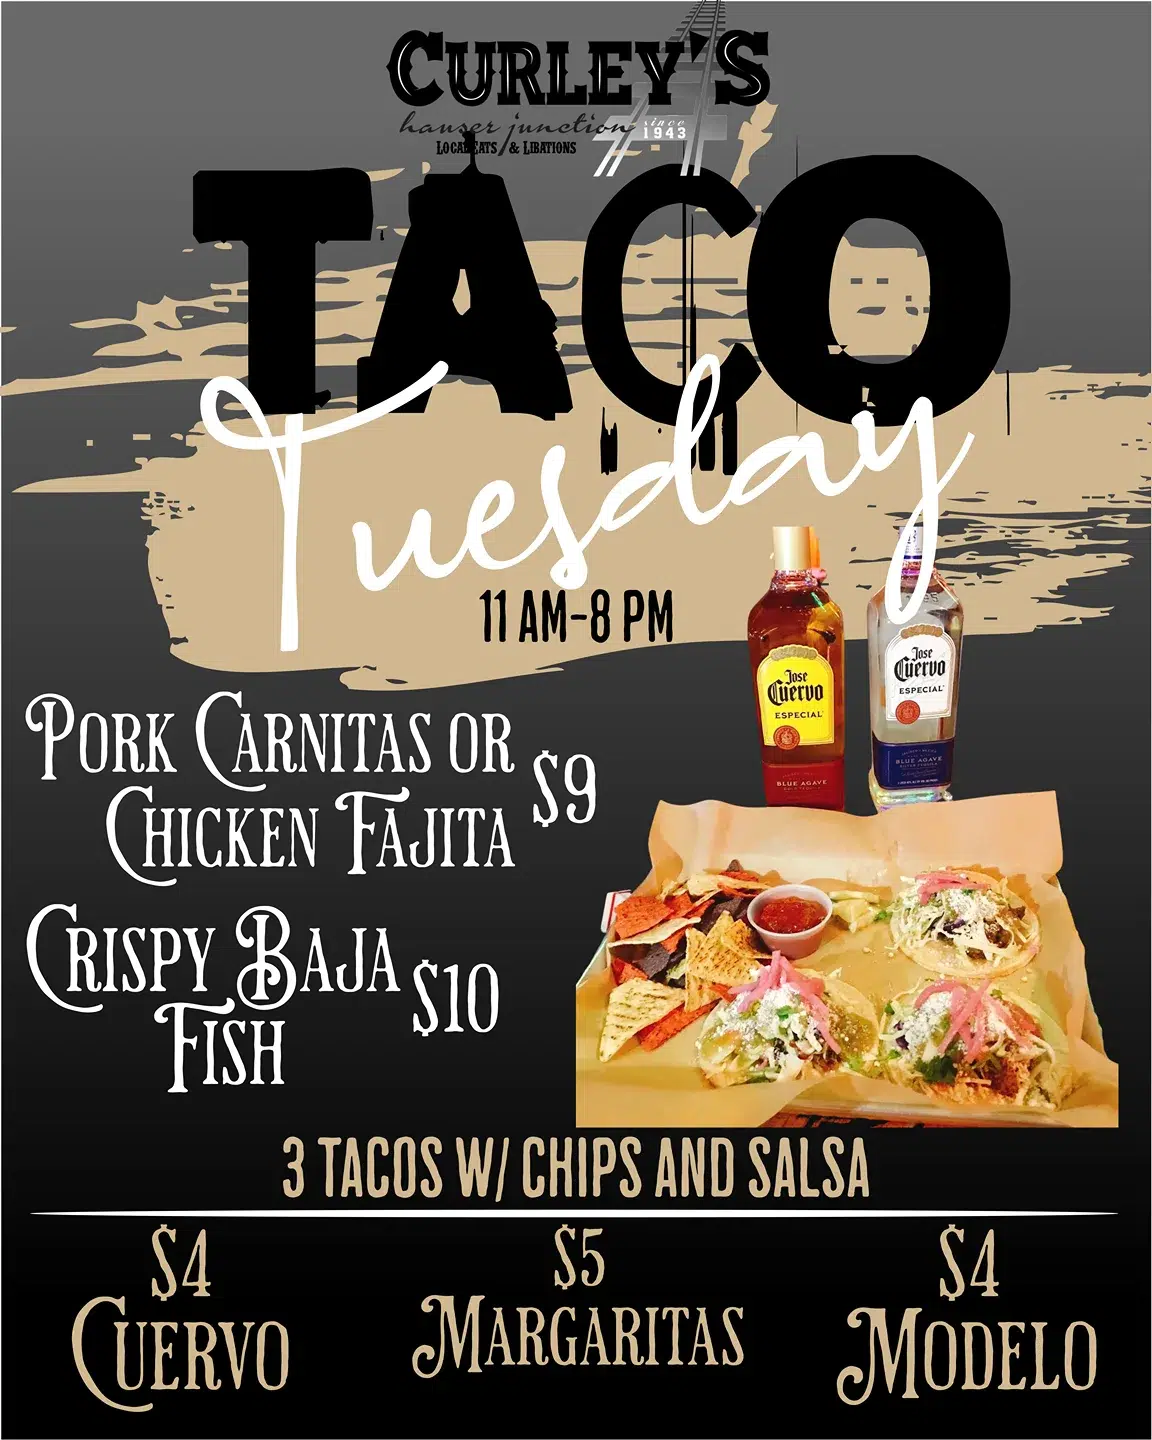 Flyer for Taco Tuesday at Curley's Bar in Post Falls